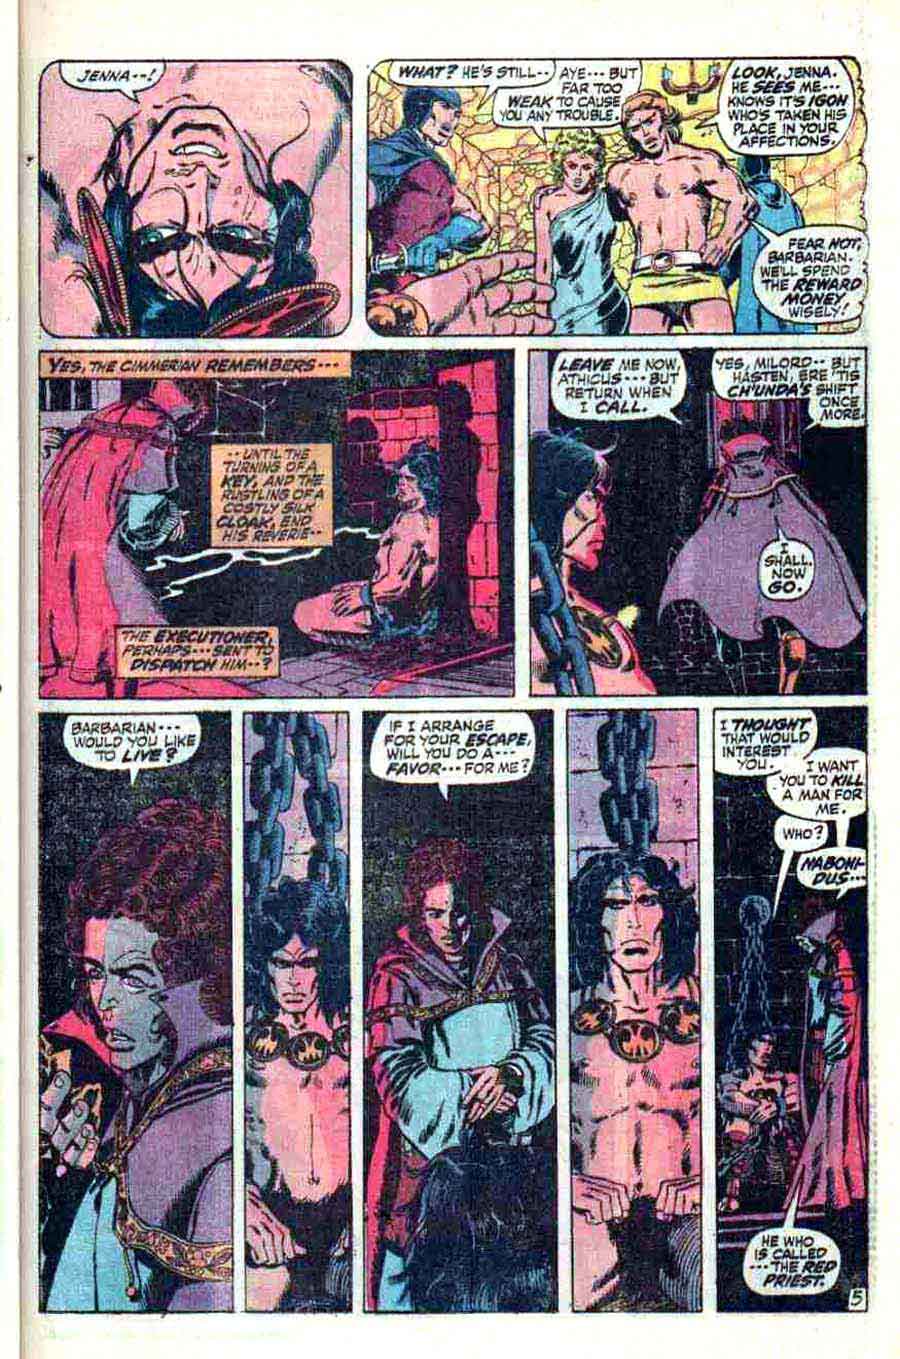 Conan the Barbarian v1 #11 marvel comic book page art by Barry Windsor Smith